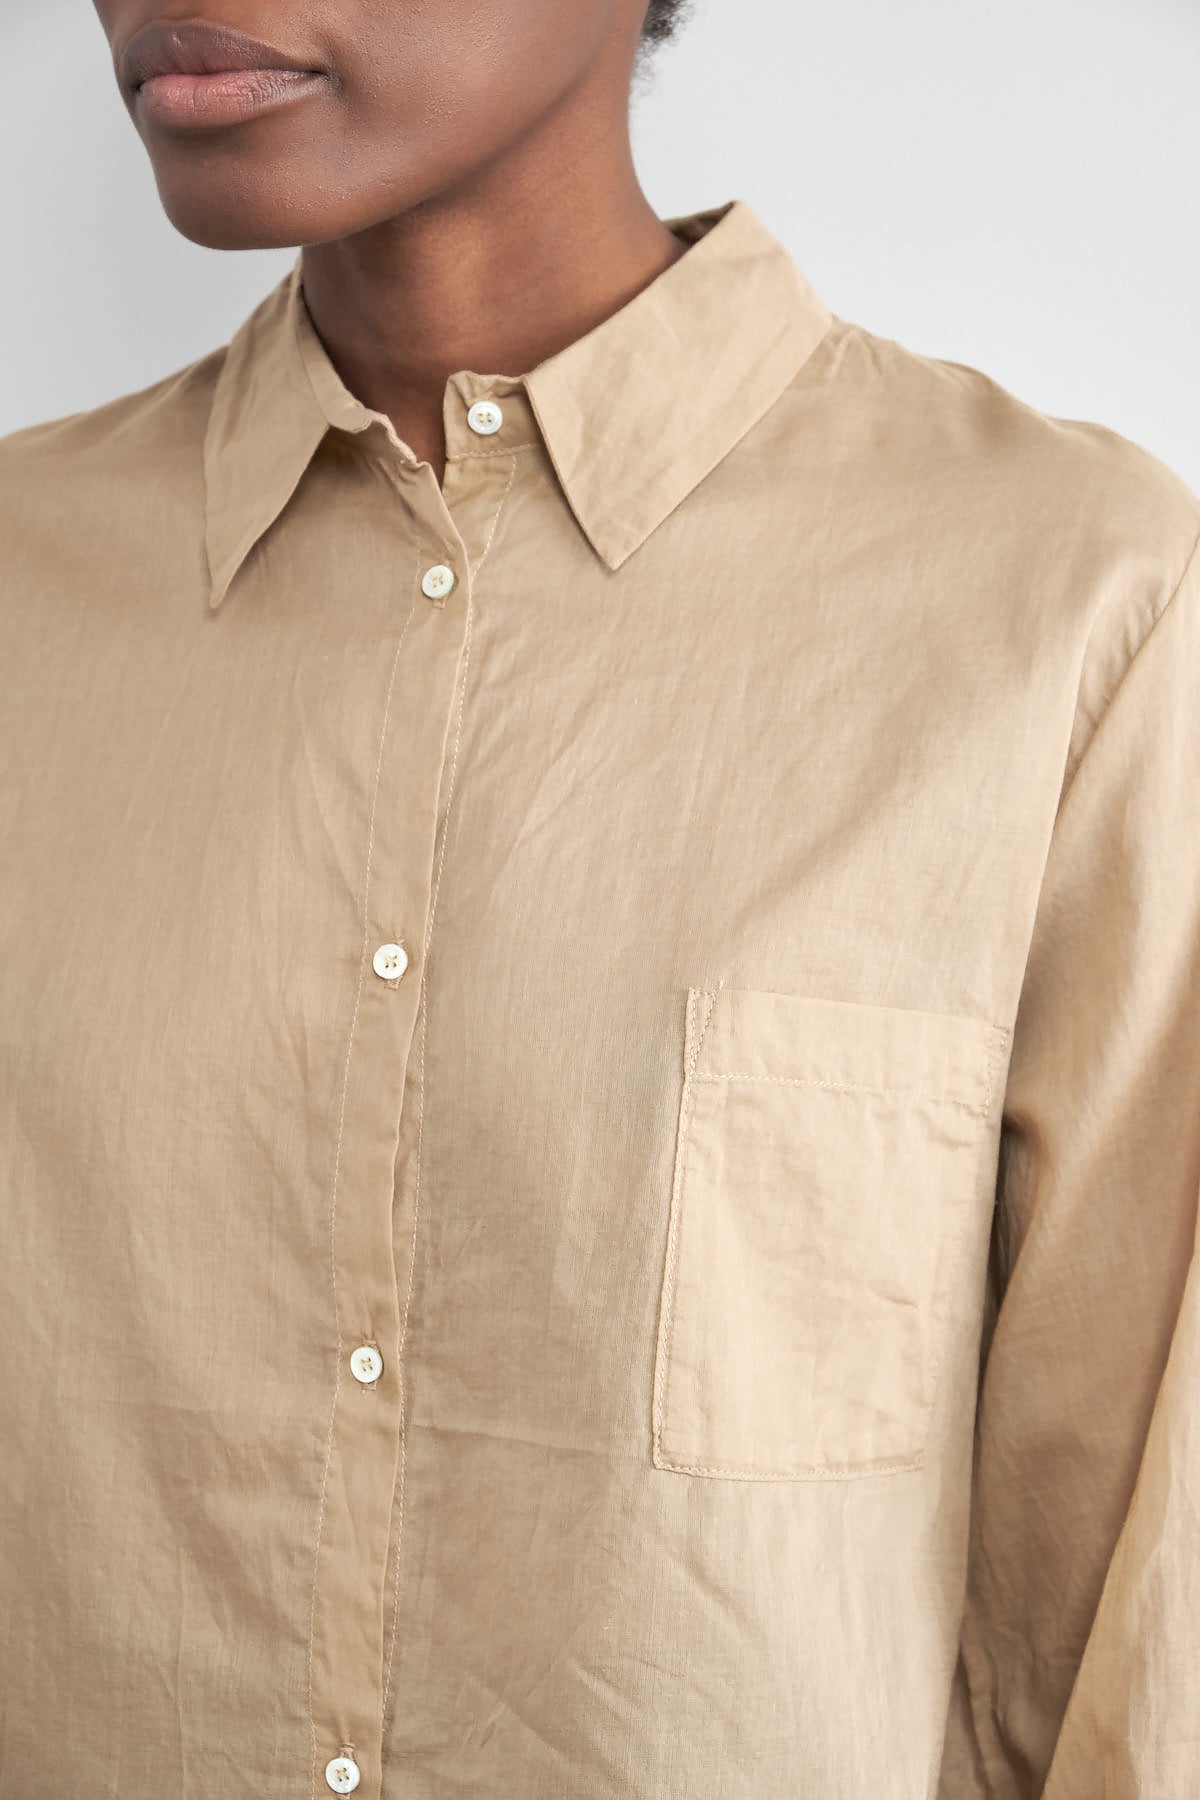 Placket on Illusion Shirt in Camel